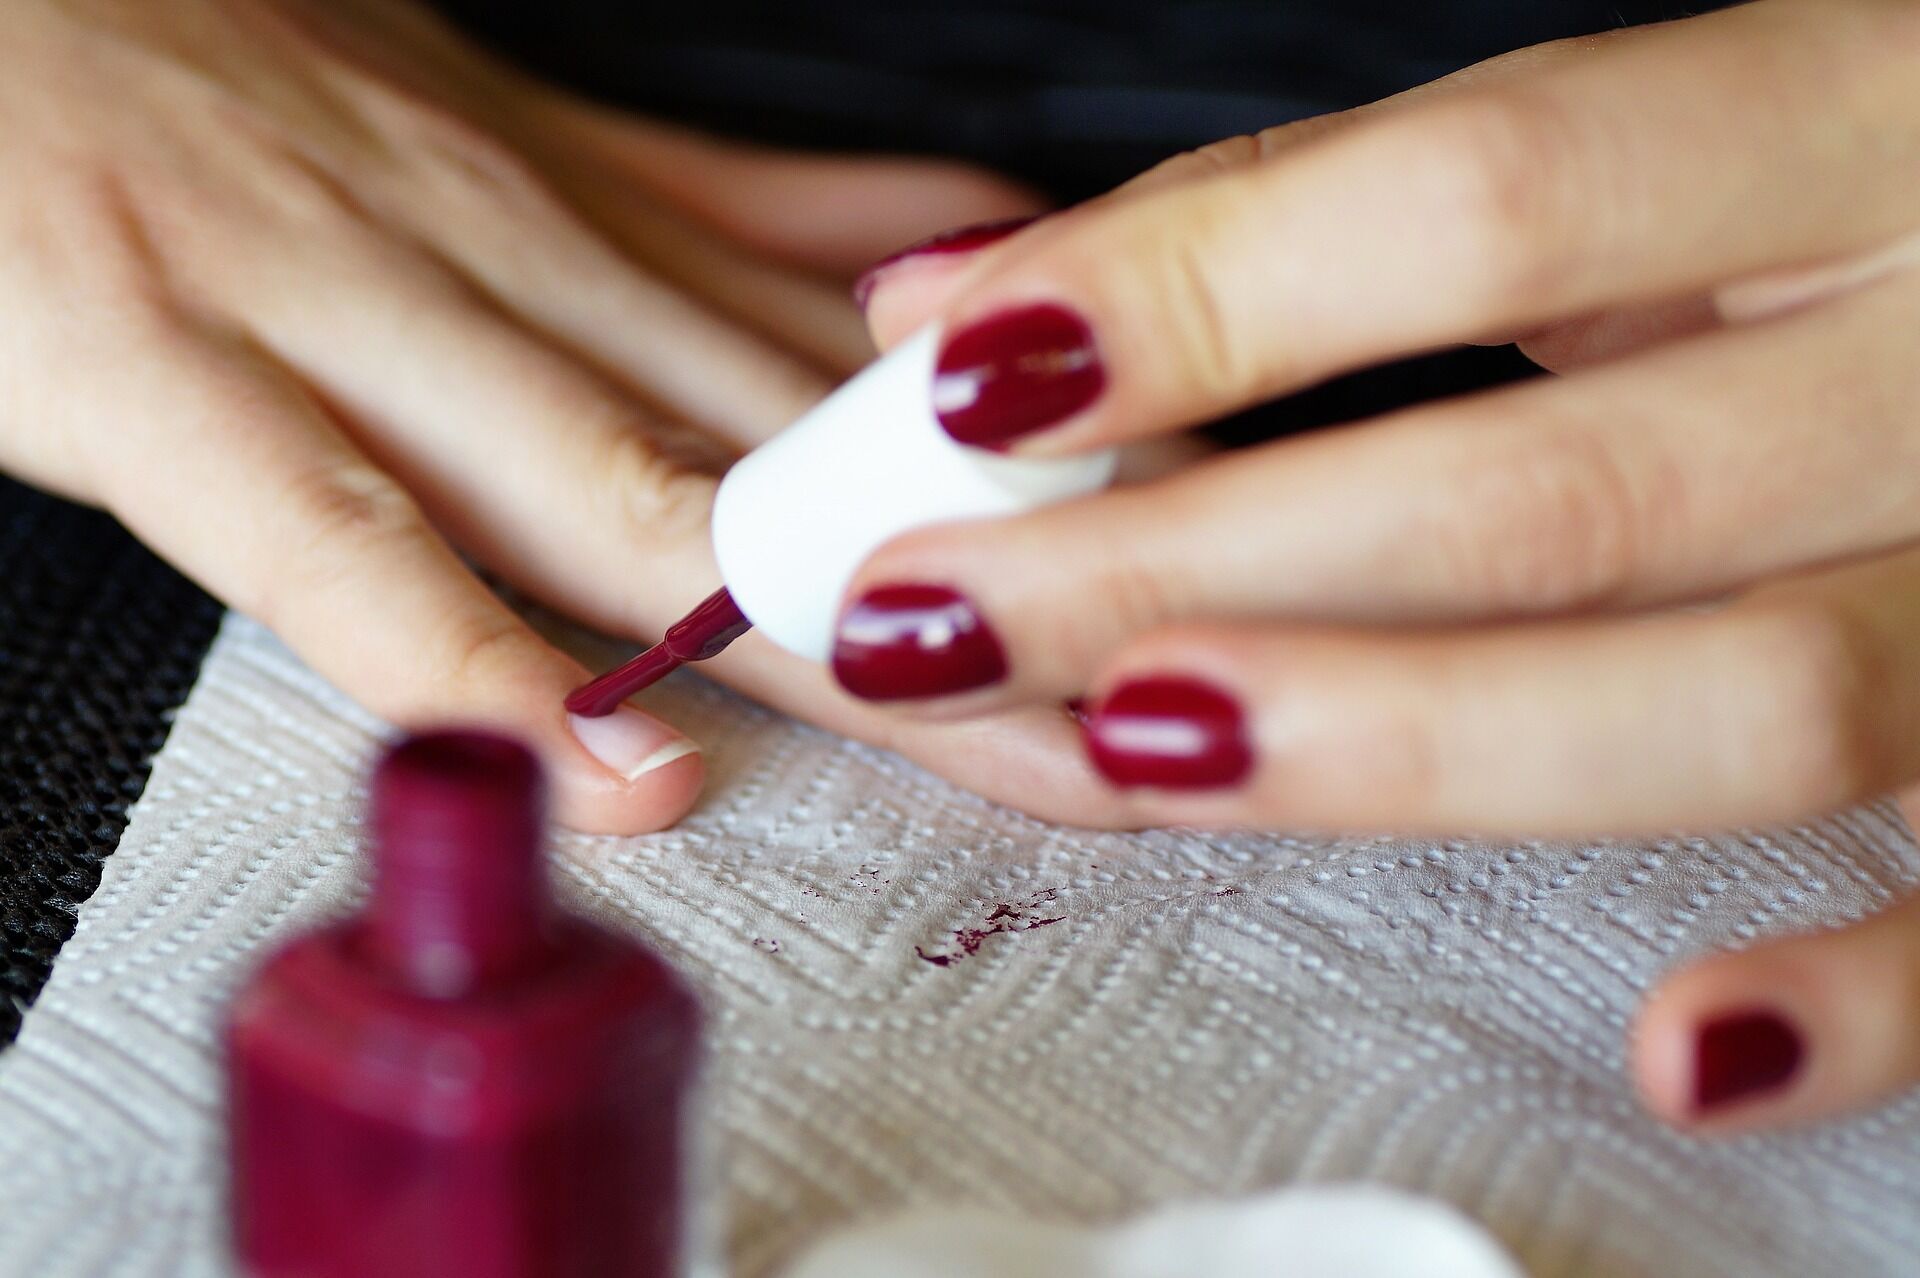 Gel polish can be removed without acetone